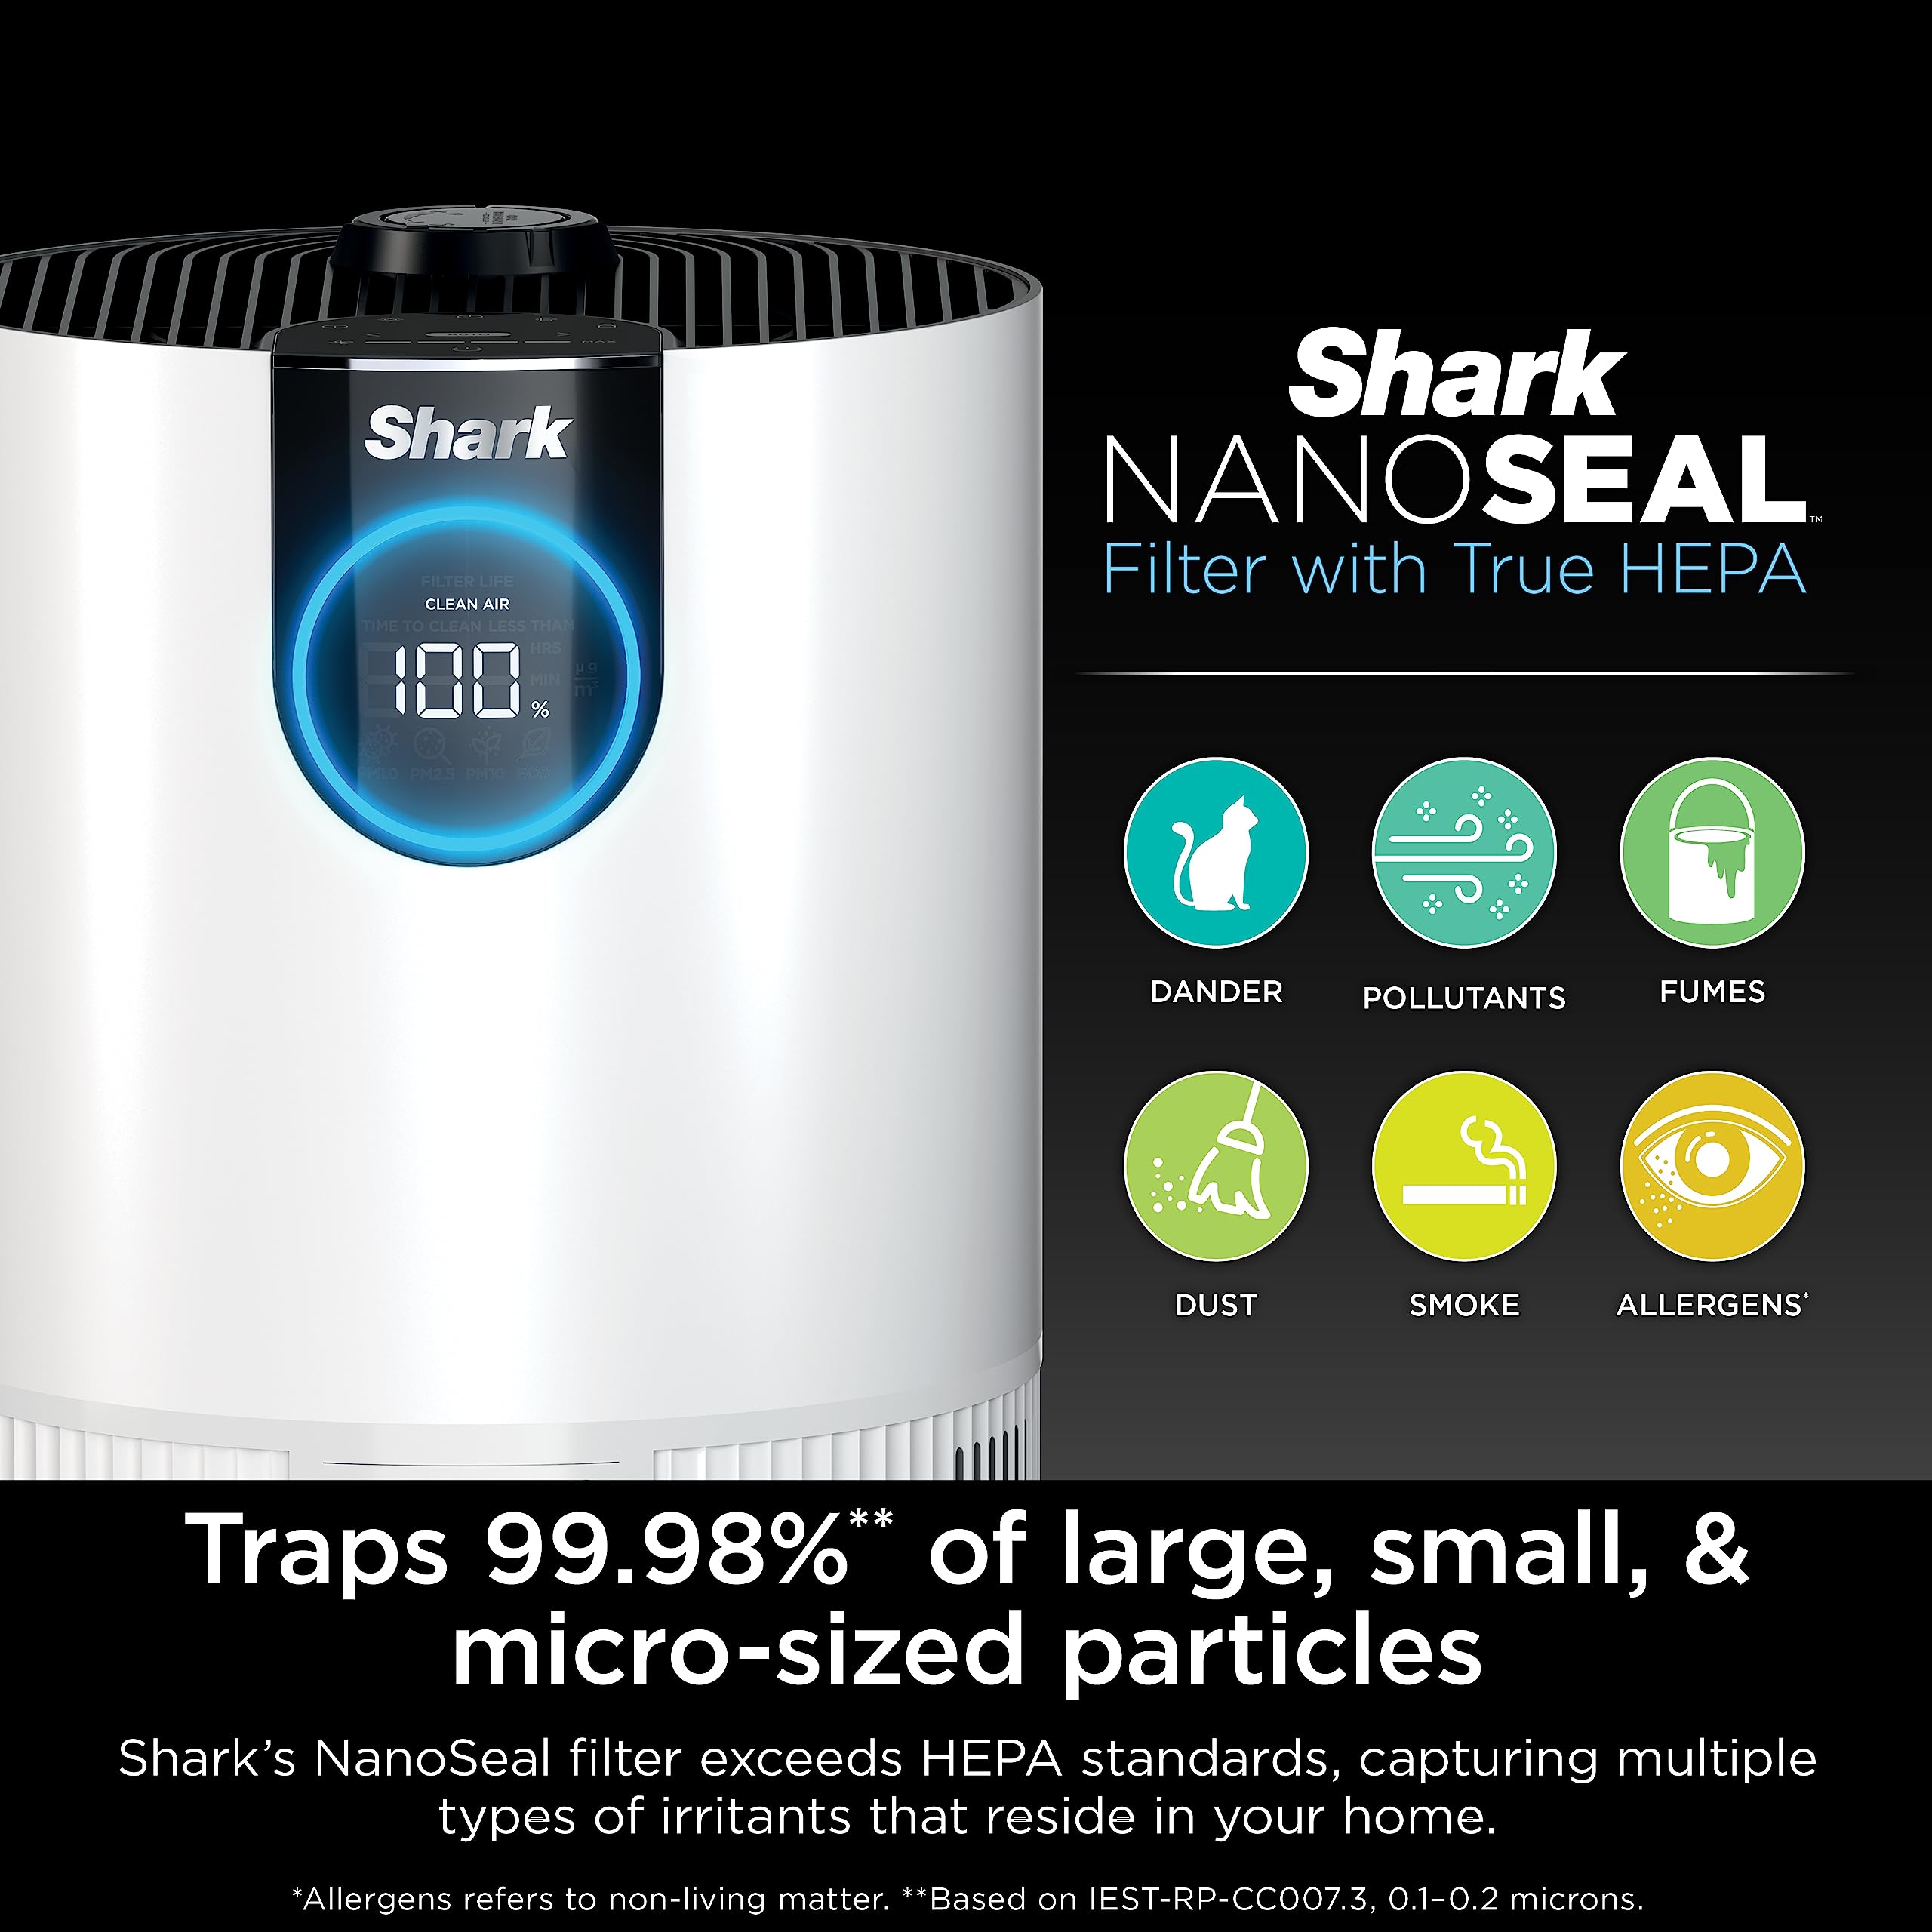 Shark HP132 Clean Sense Air Purifier with Odor Neutralizer Technology, HEPA Filter, 500 sq. ft., Small Room, Bedroom, Office, Captures 99.98% of Particles, Dust, Smoke & Allergens, Portable, White